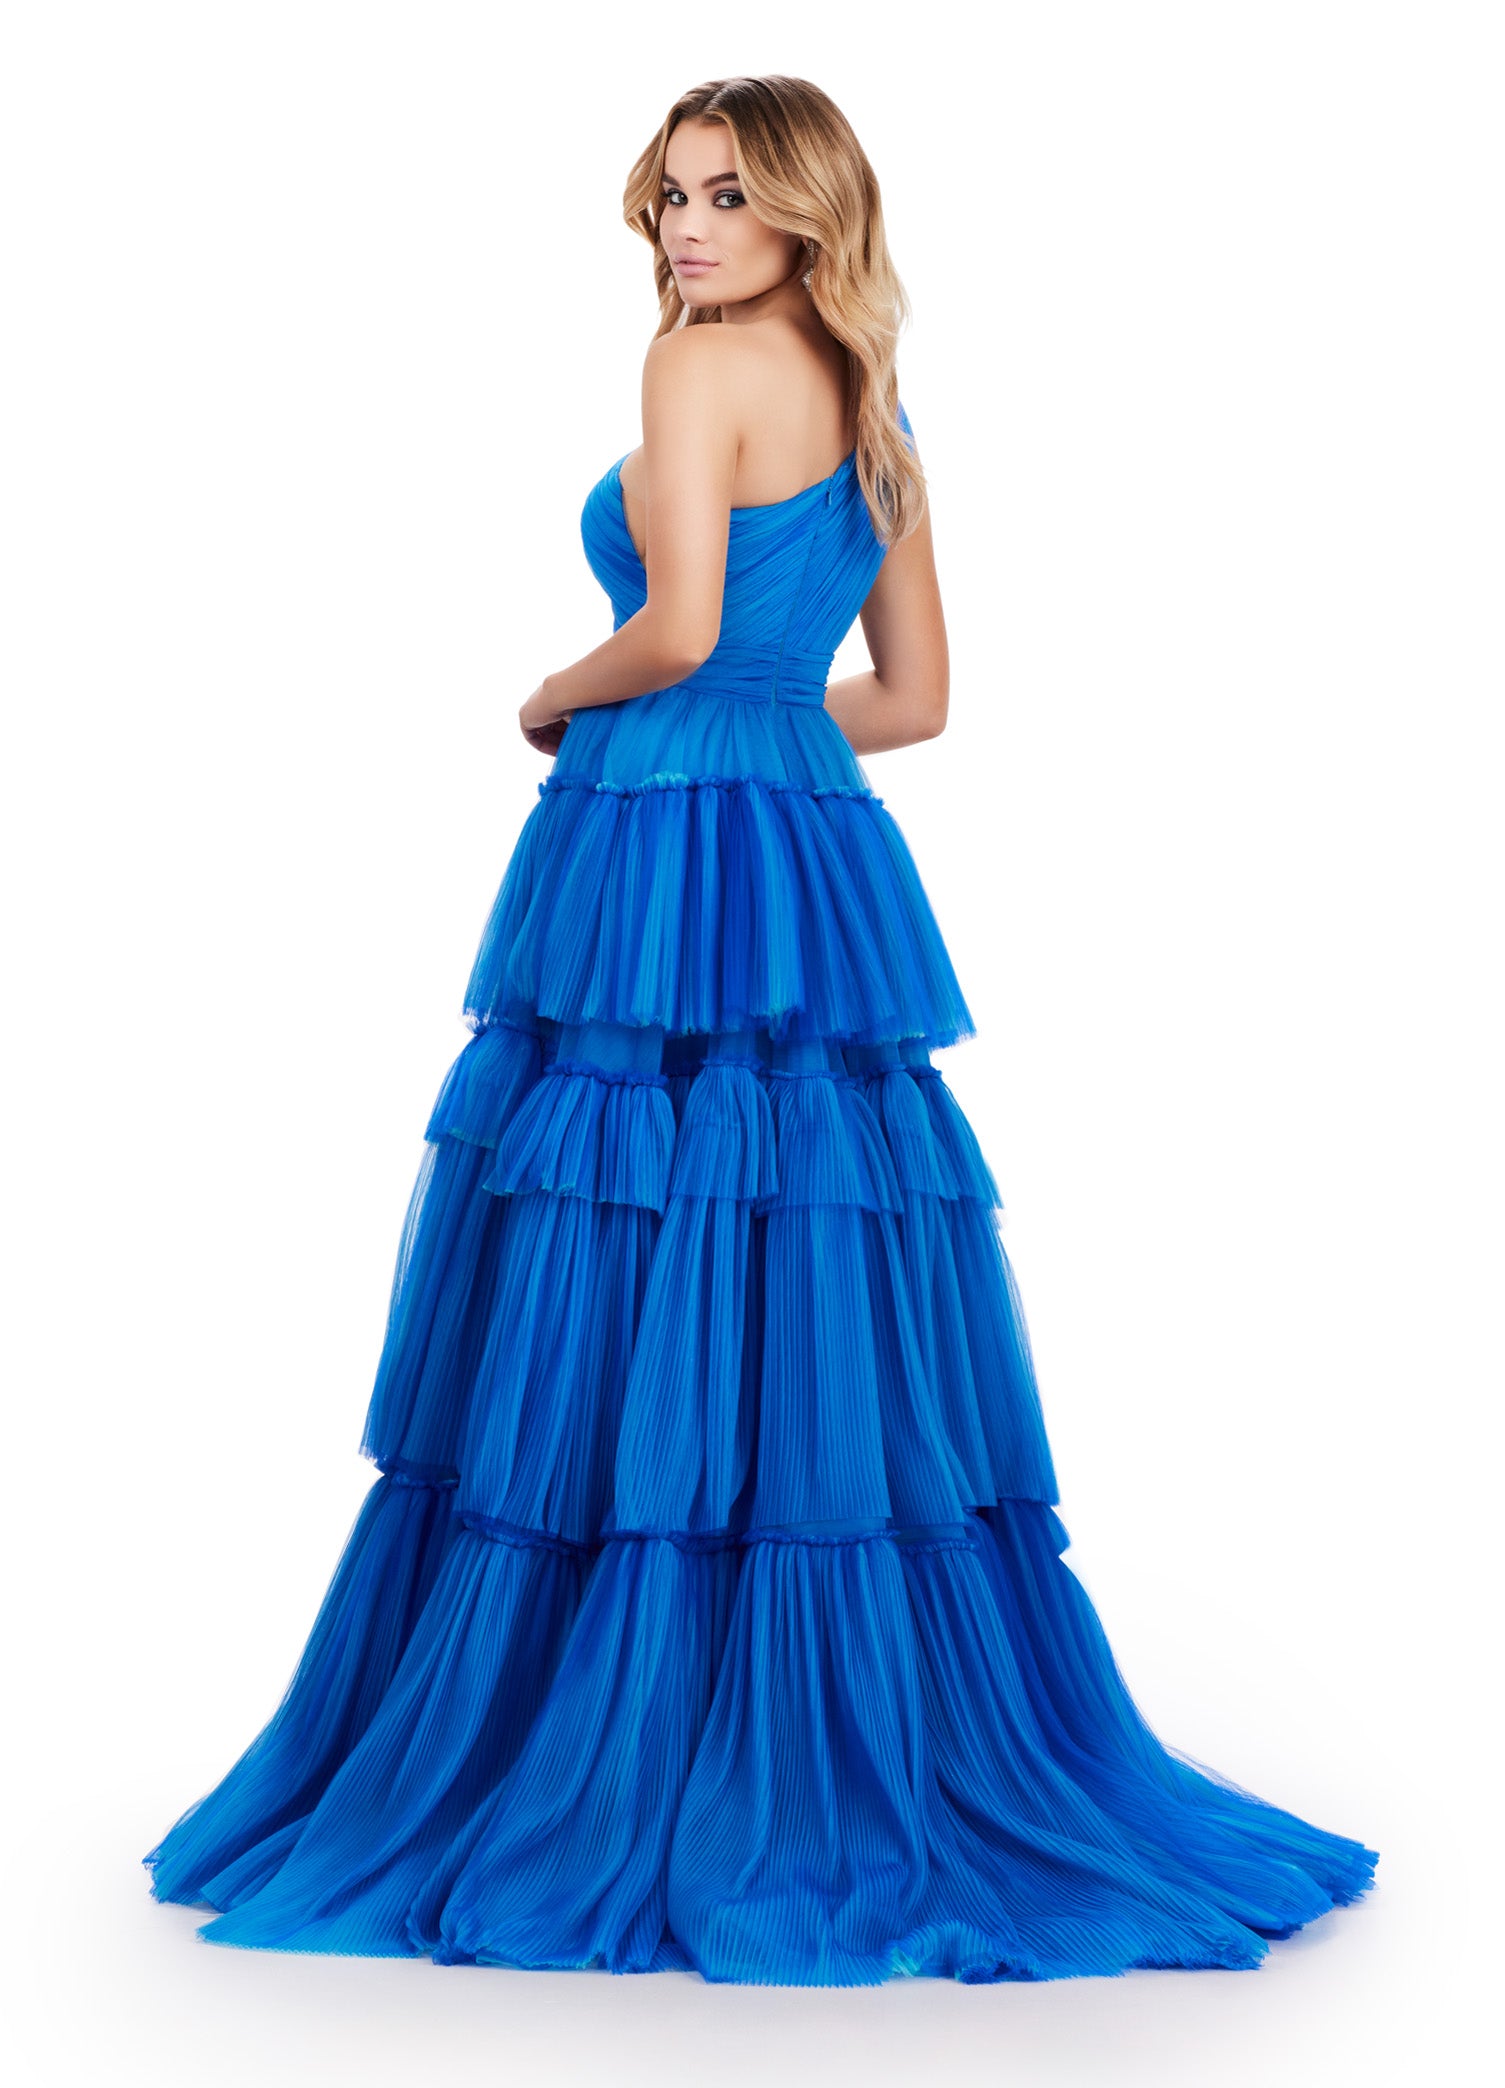 Ashley Lauren 11619 Long Prom Dress Two-Tone Tiered Tulle Ball